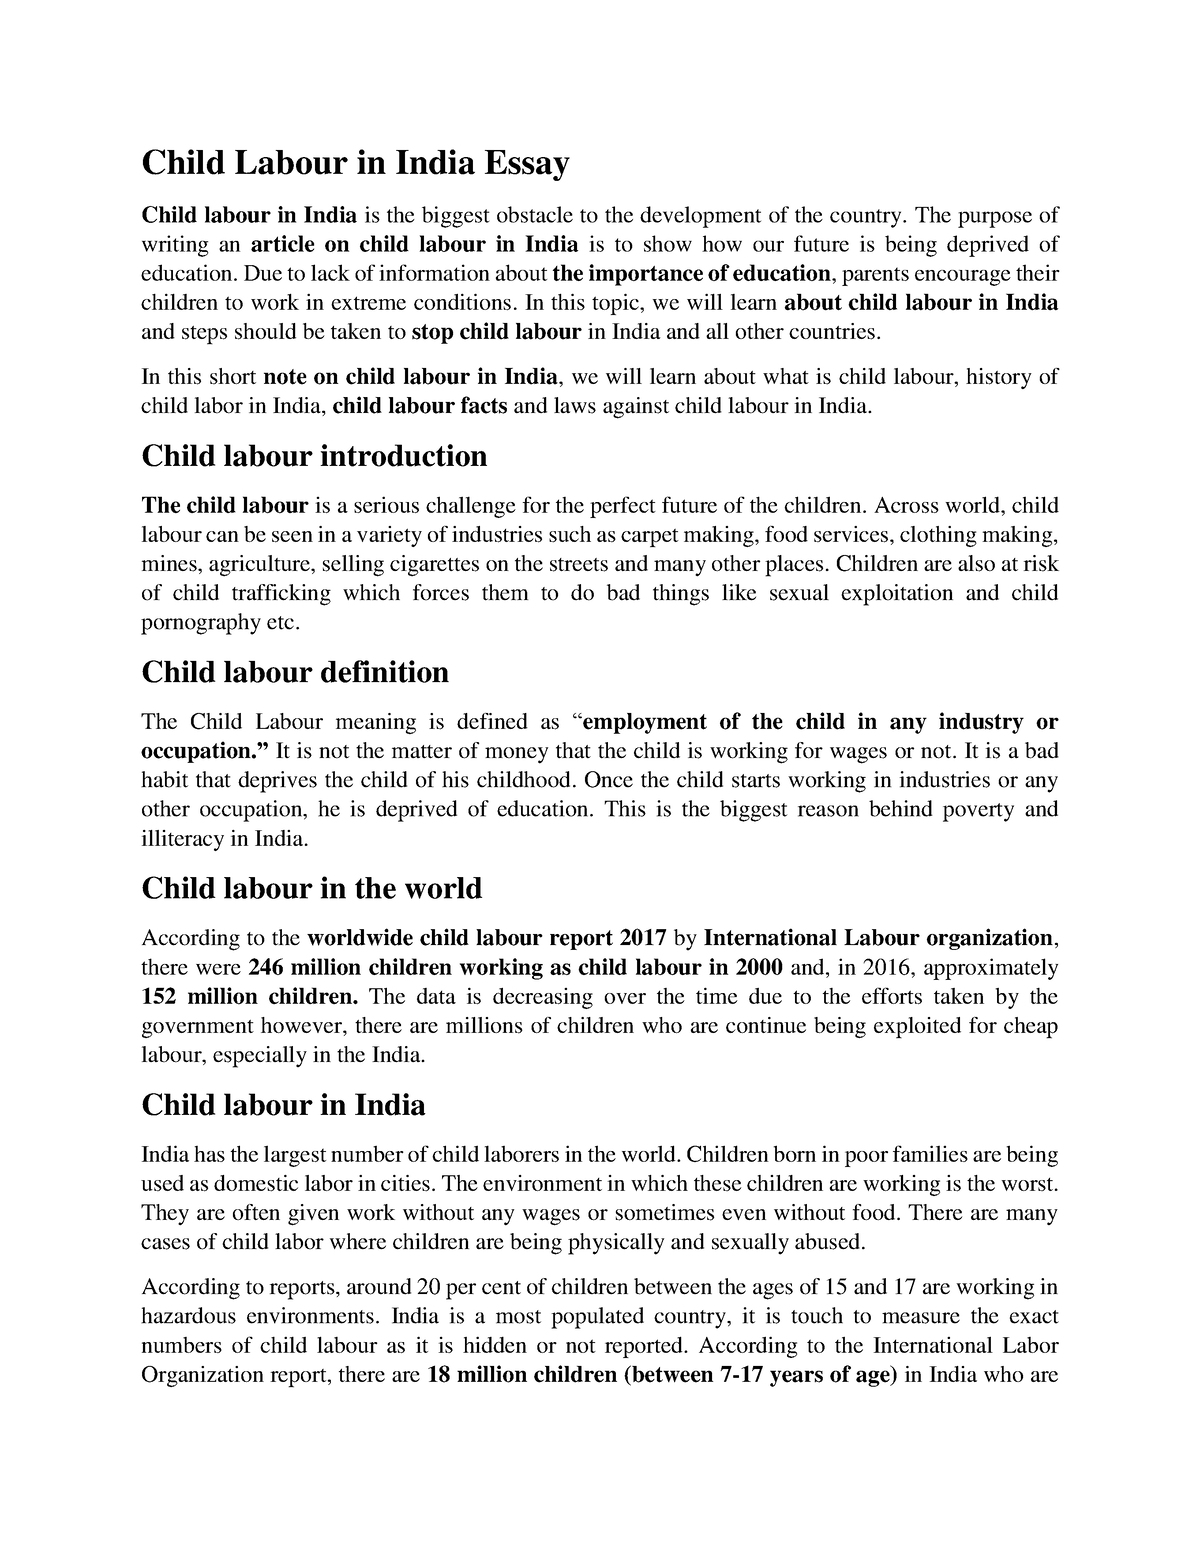 legal essay on child labour in india